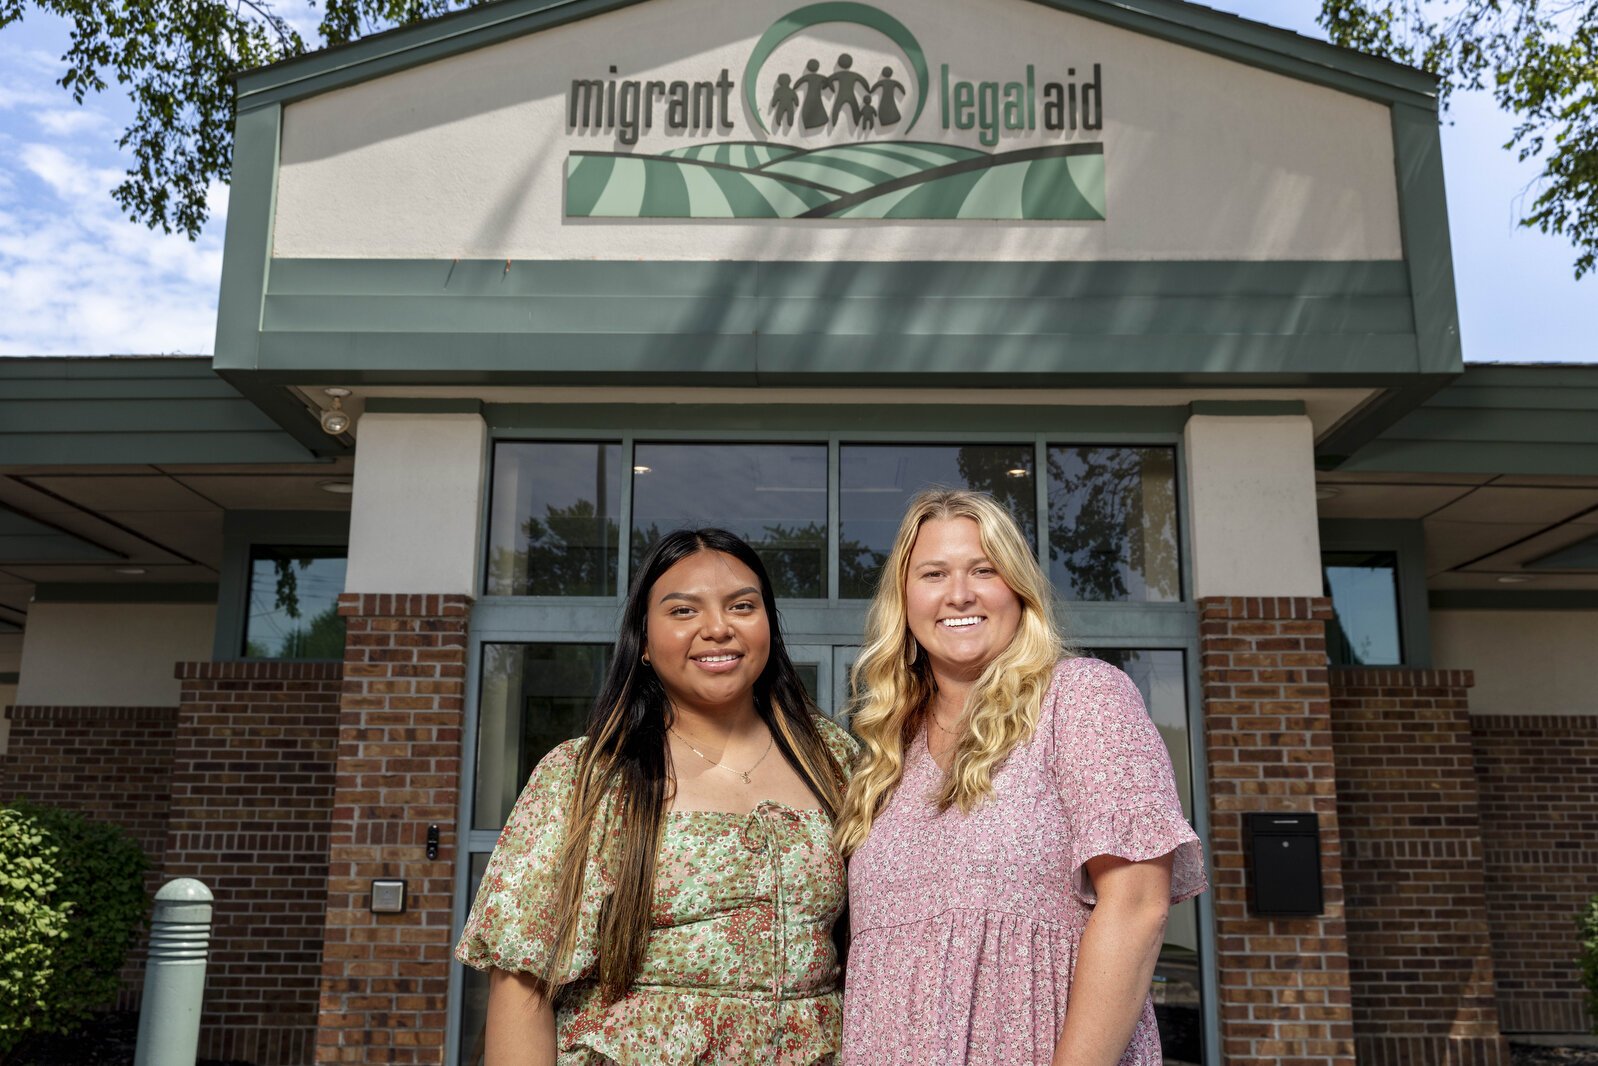 College student and former migrant worker Dilayla Martinez with Migrant Legal Aid attorney Molly Spaak.